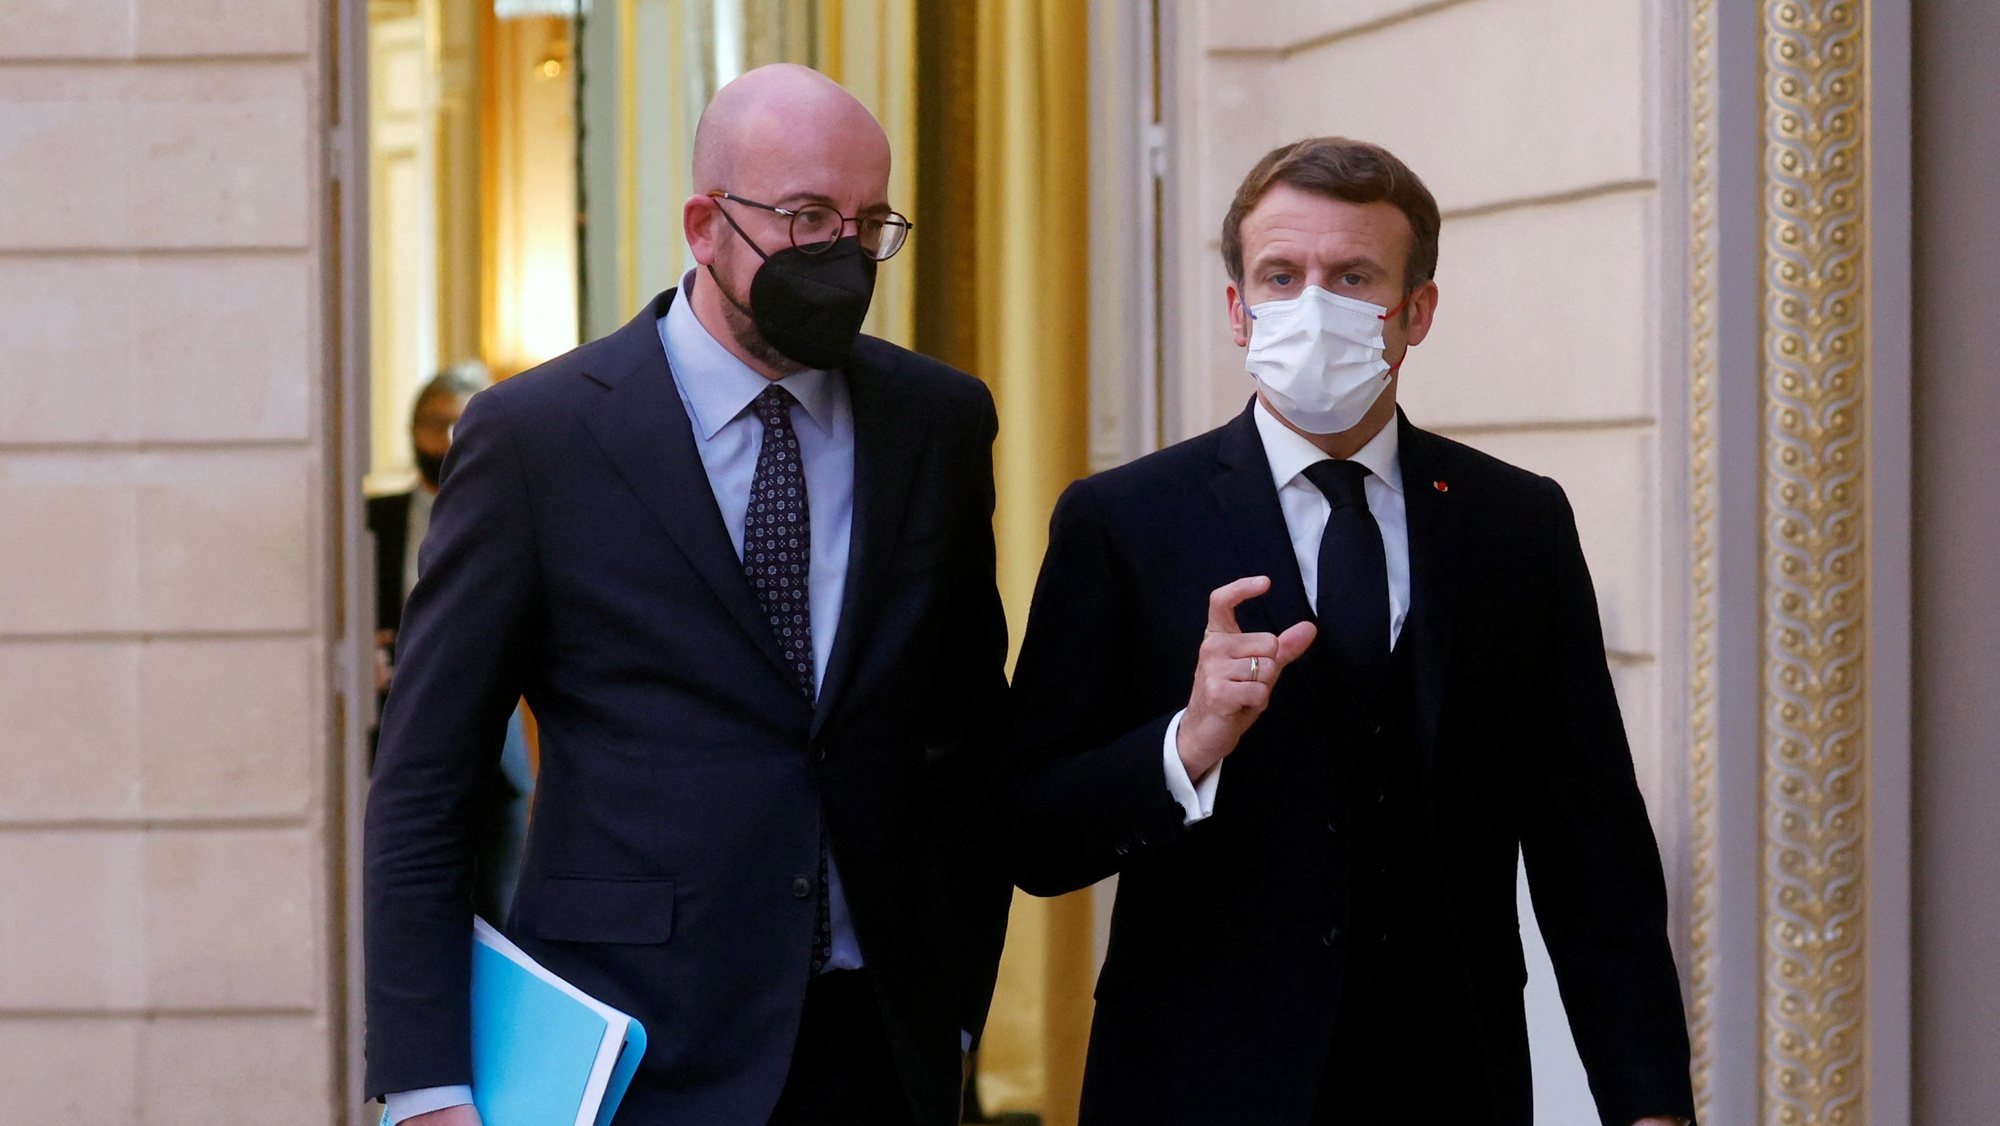 epa09678742 French President Emmanuel Macron and European Council President Charles Michel arrive to attend a joint news conference after a working lunch to discuss main priorities of the 6-month French presidency of the European Union, at the Elysee Palace in Paris, France, 11 January 2022.  EPA/GONZALO FUENTES / POOL  MAXPPP OUT